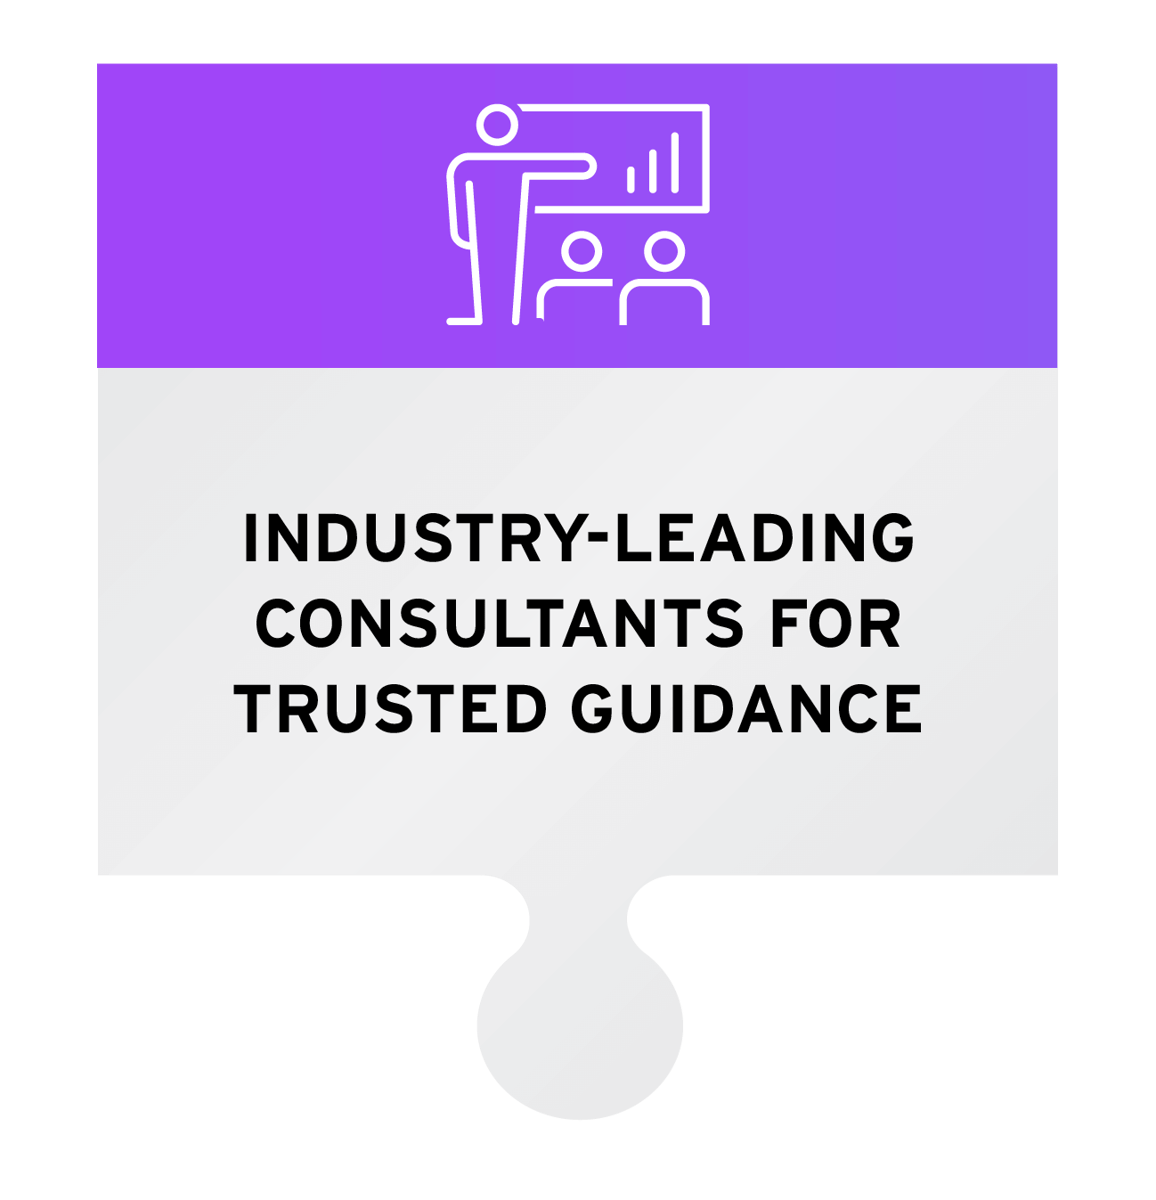 Industry-leading consultants for trusted guidance